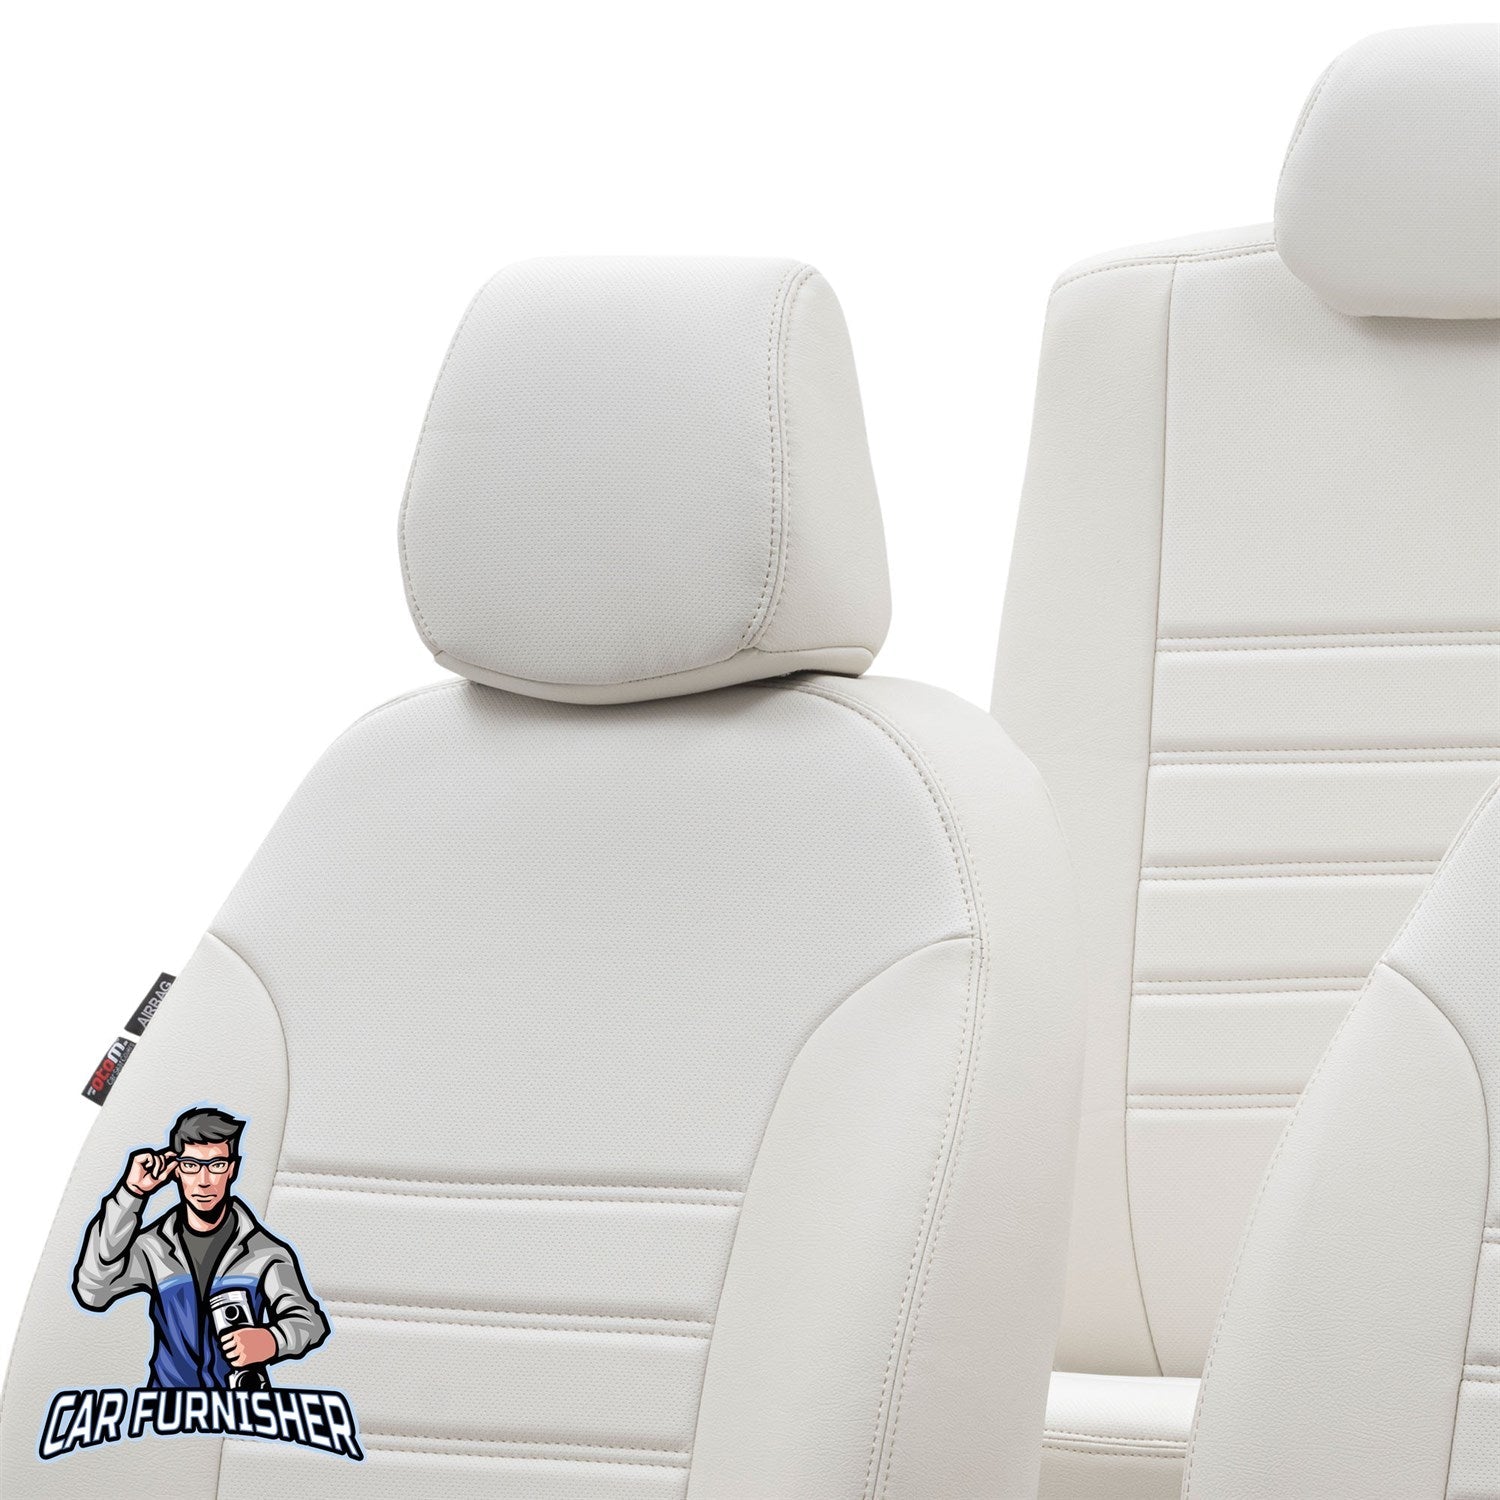 Volvo V40 Seat Cover Istanbul Leather Design Beige Leather